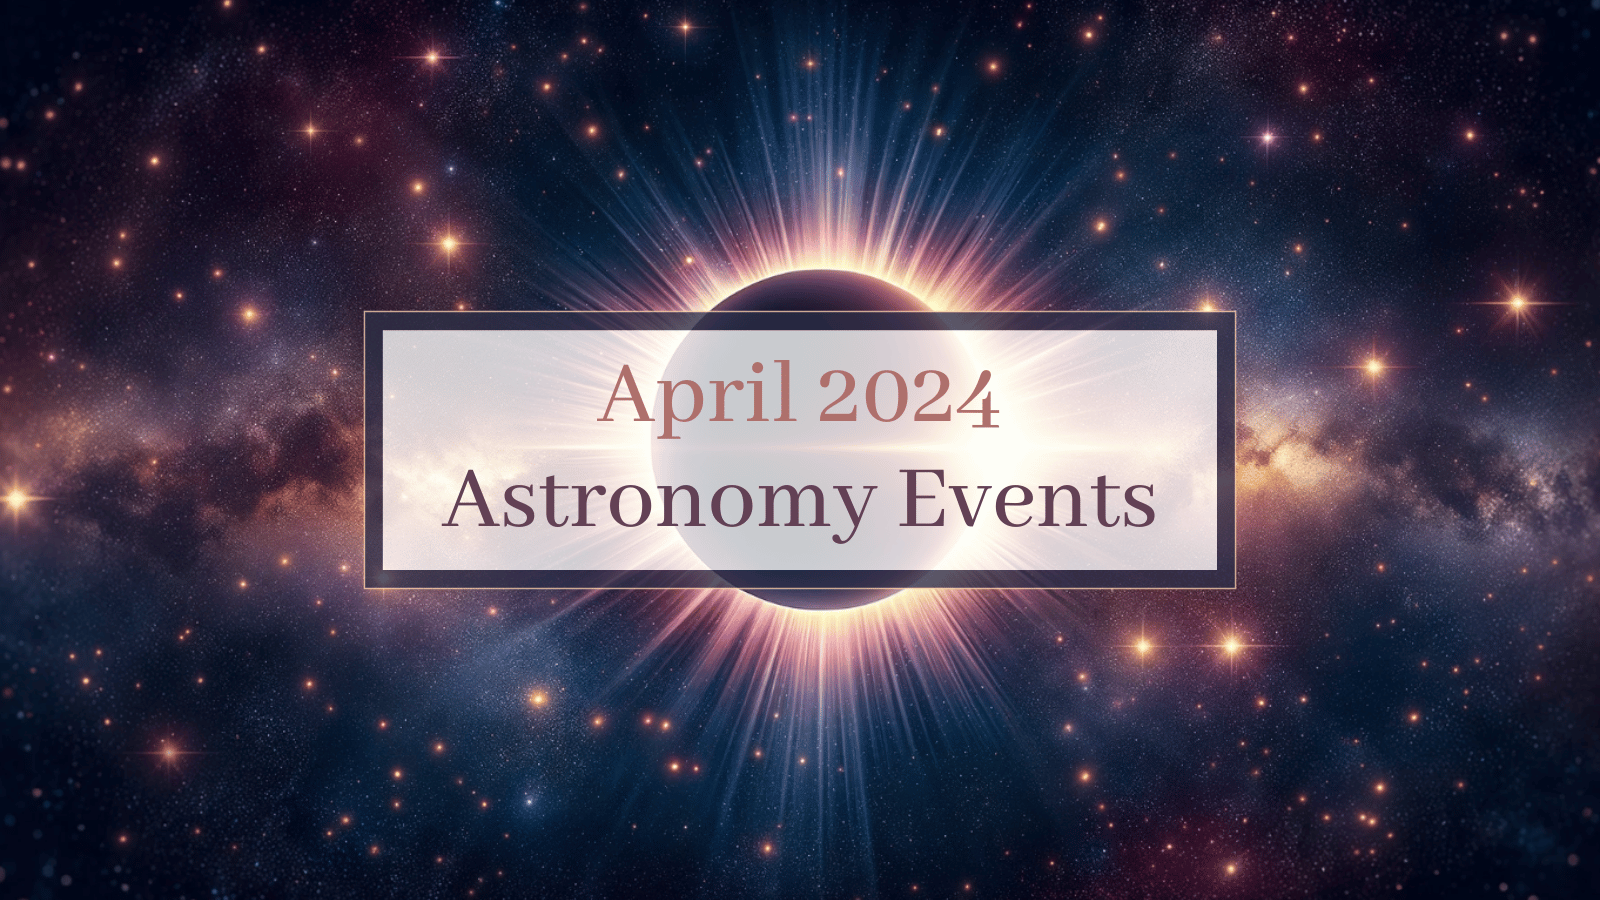 April 2024 Astronomy Events